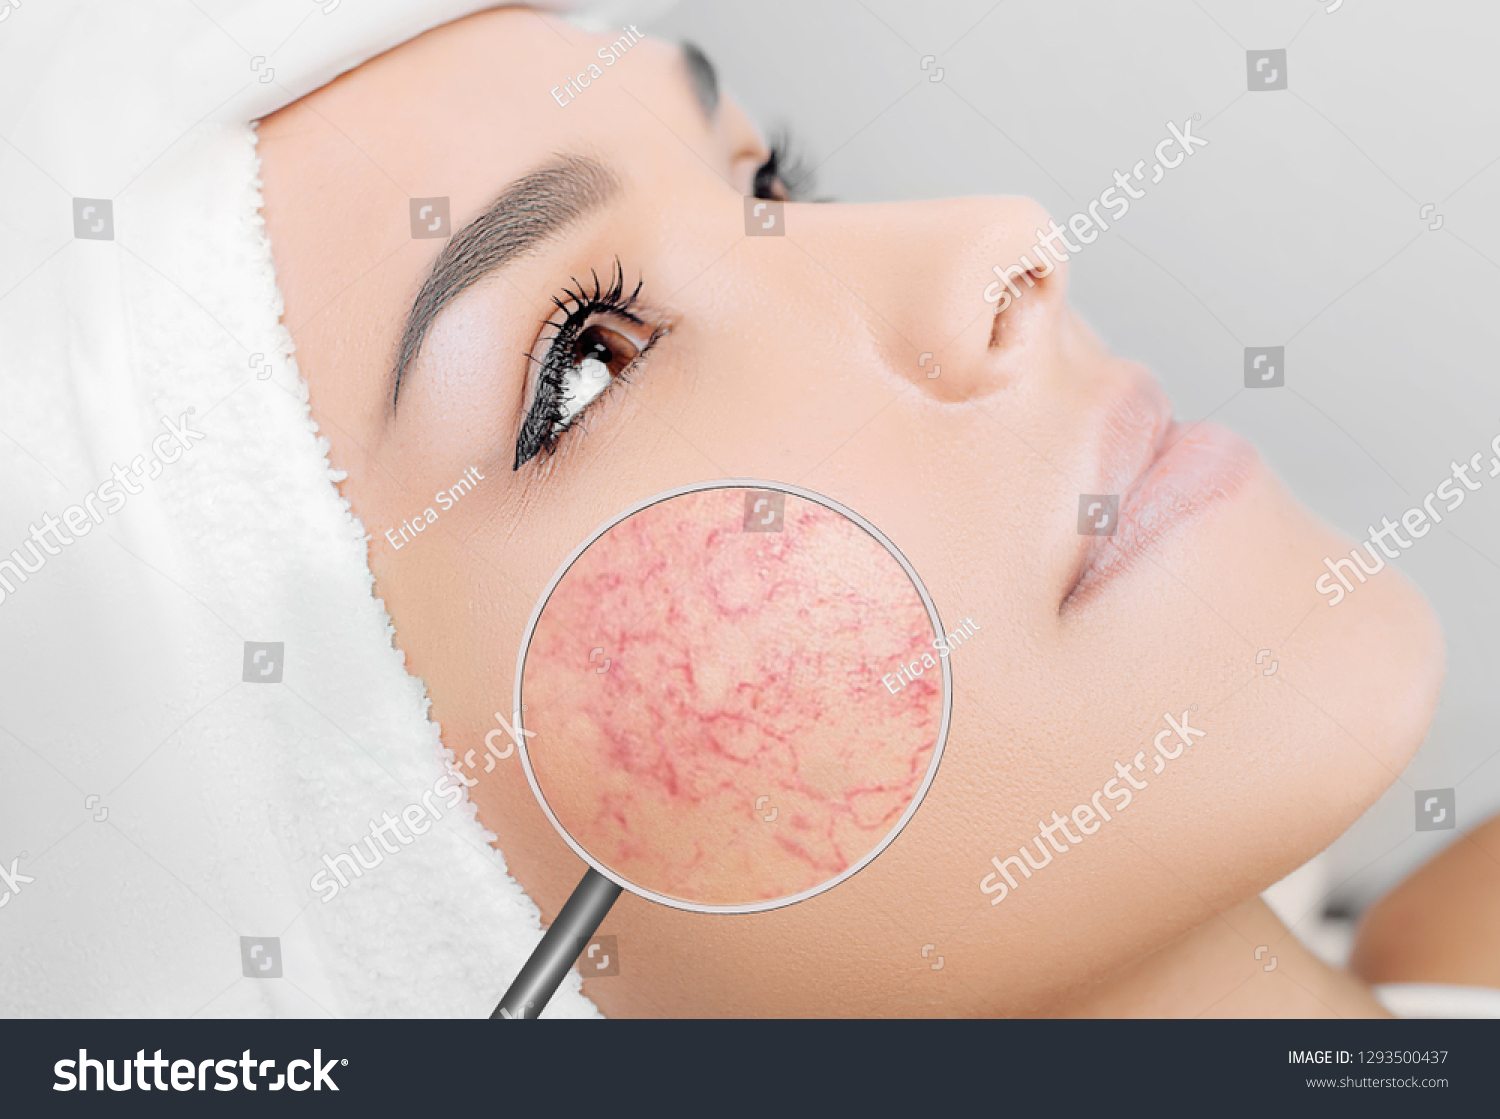 magnifying glass showing couperose on face skin. Woman showing problems couperose-prone sensitive skin #1293500437